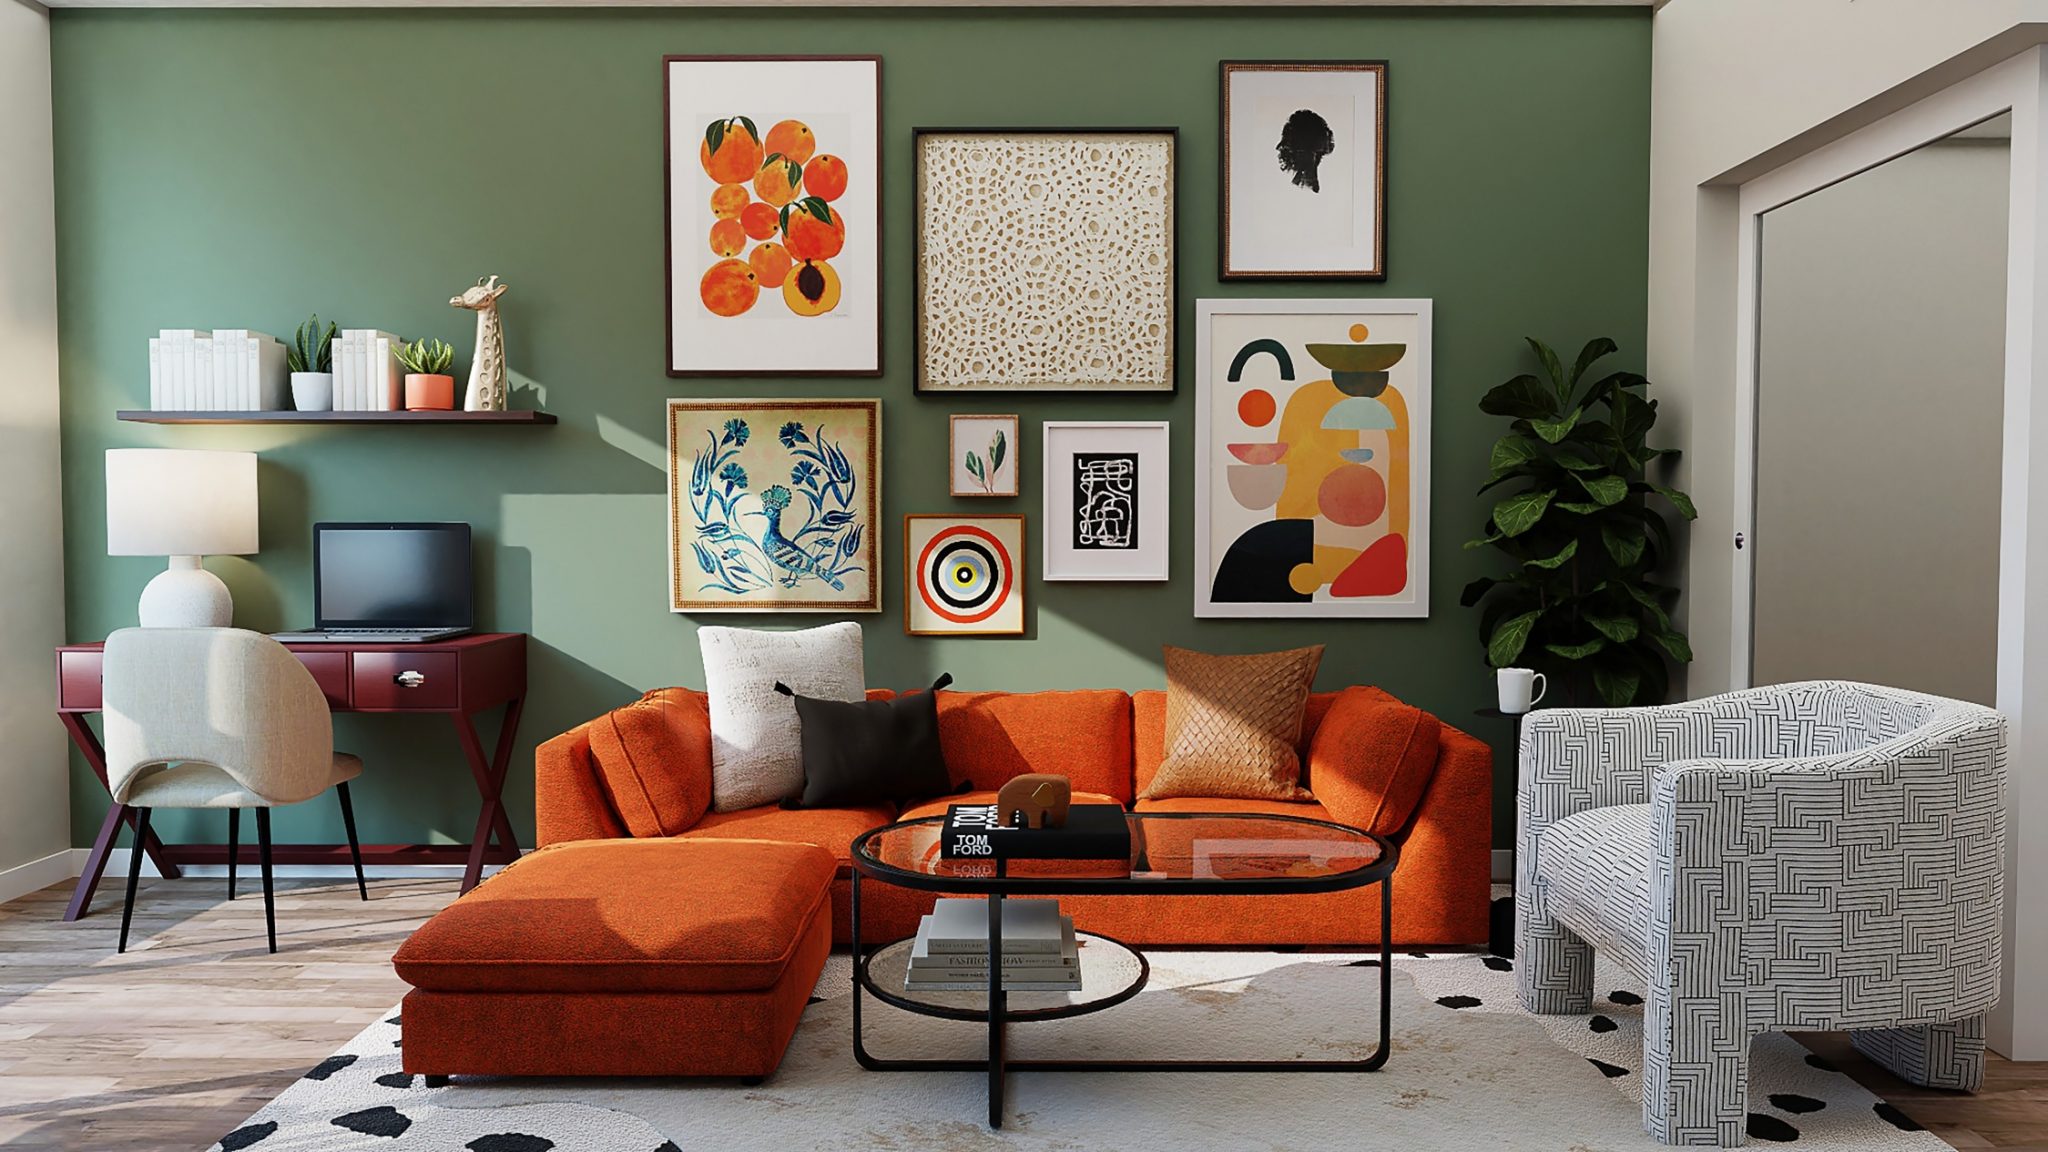 20 Best Interior Design Hashtags to Reach More People on Instagram